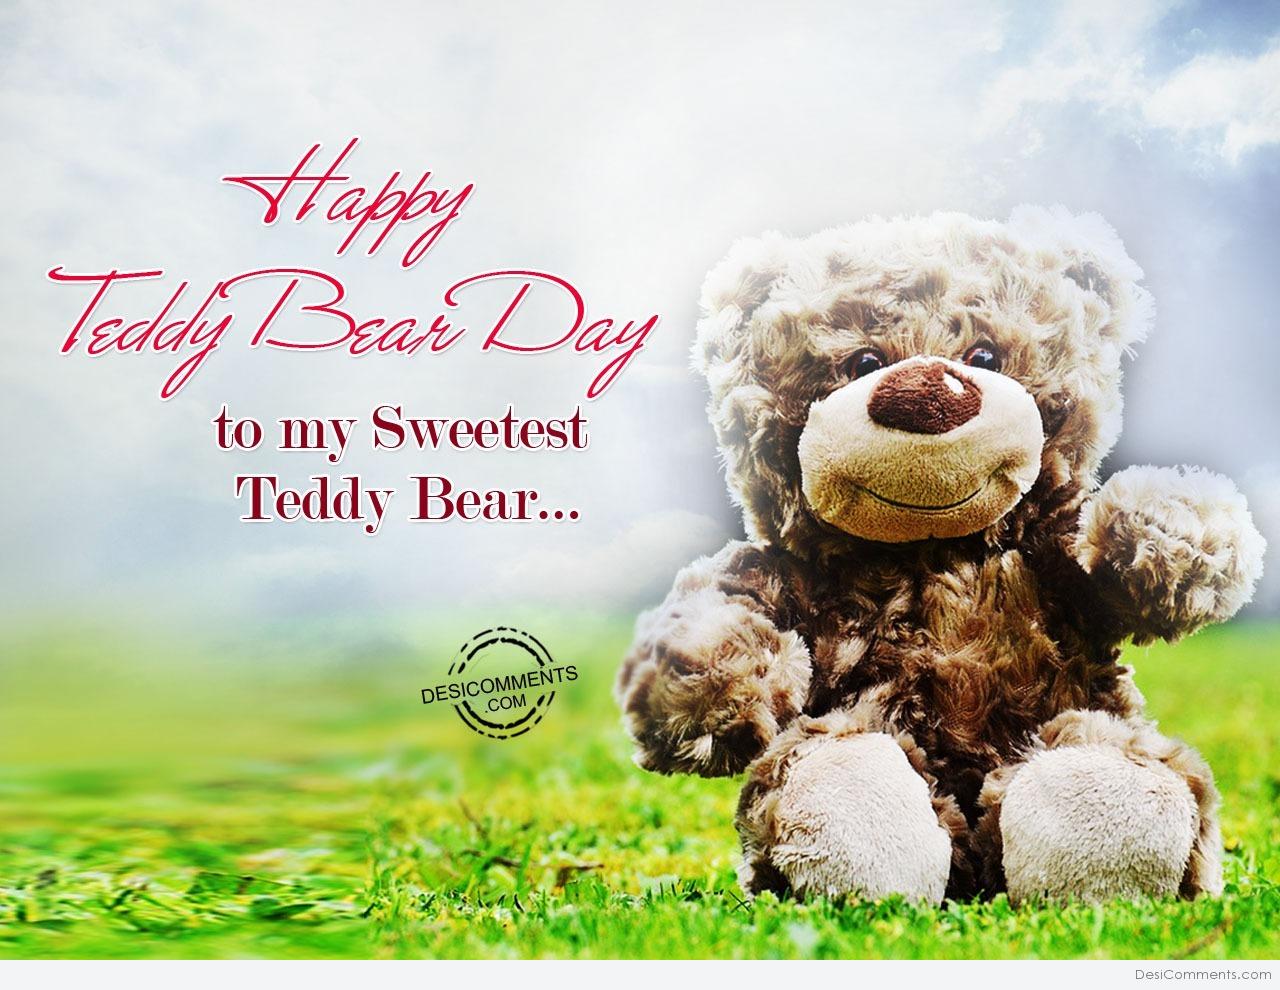 Teddy Bear Day Pic Download ~ 140+ Teddy Bear Day Pictures, Images ...